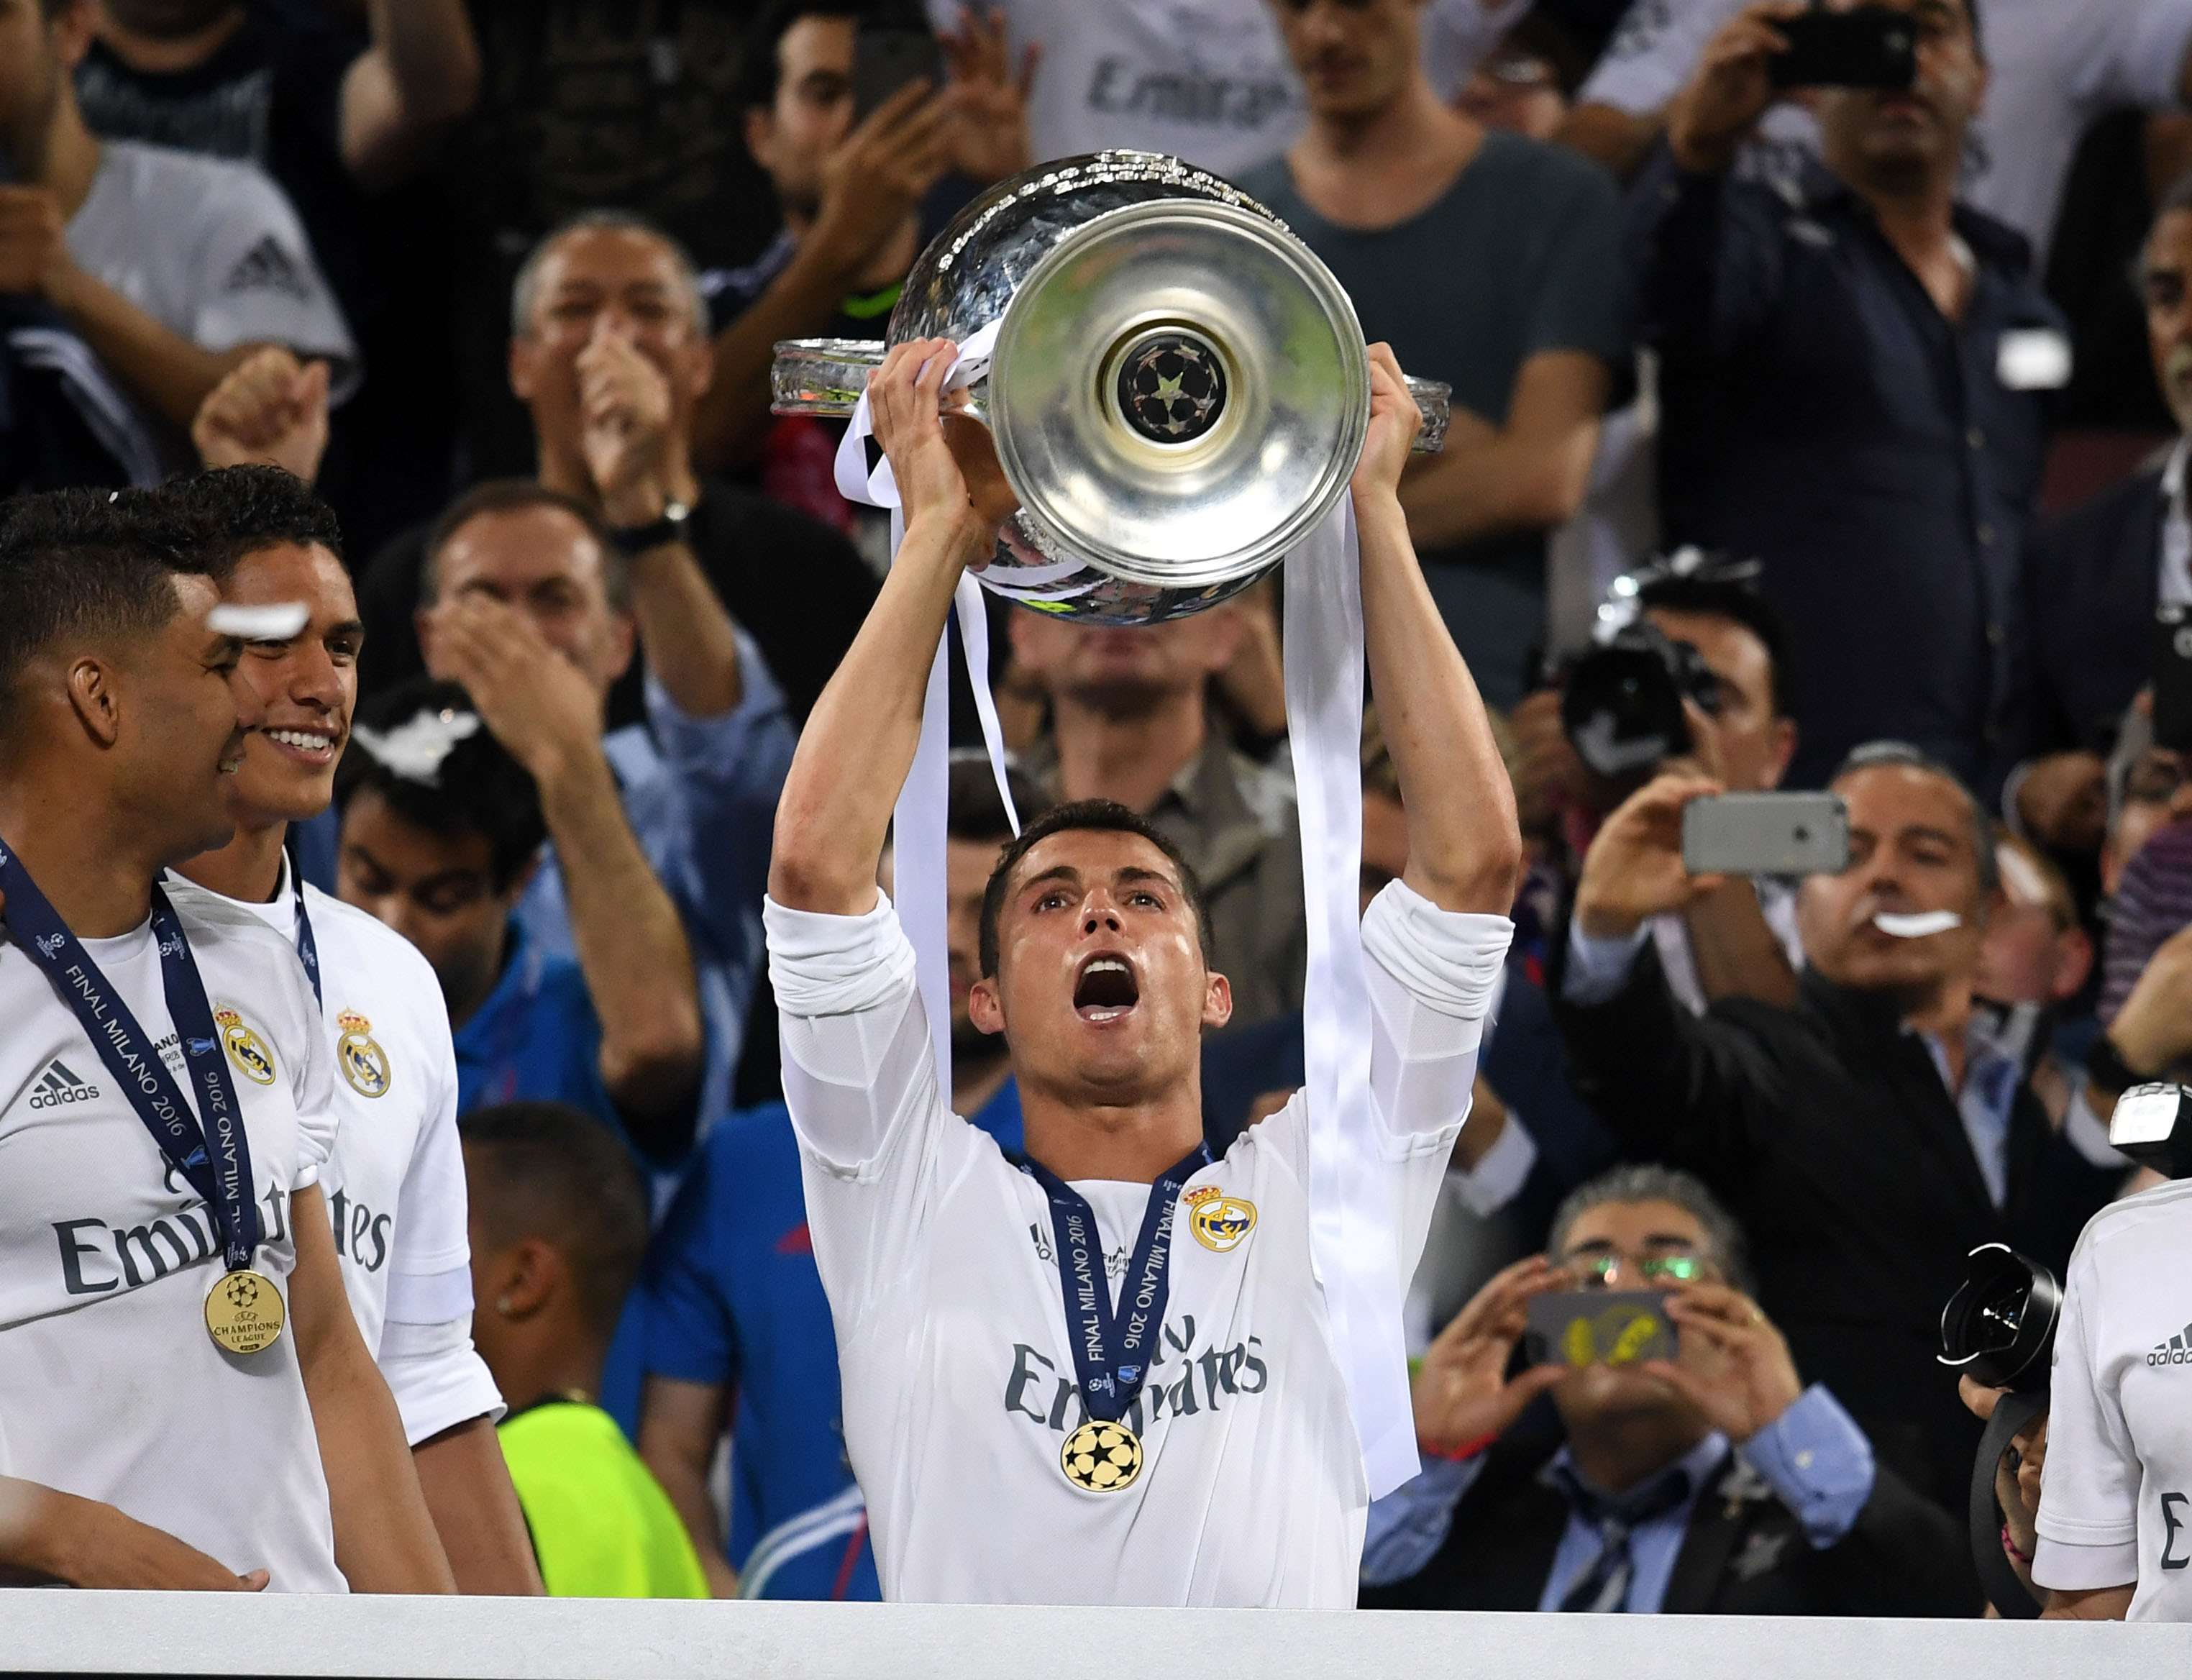 Cristiano Ronaldo raises the Champions League trophy as Real Madrid are crowned again. Photo: Xinhua